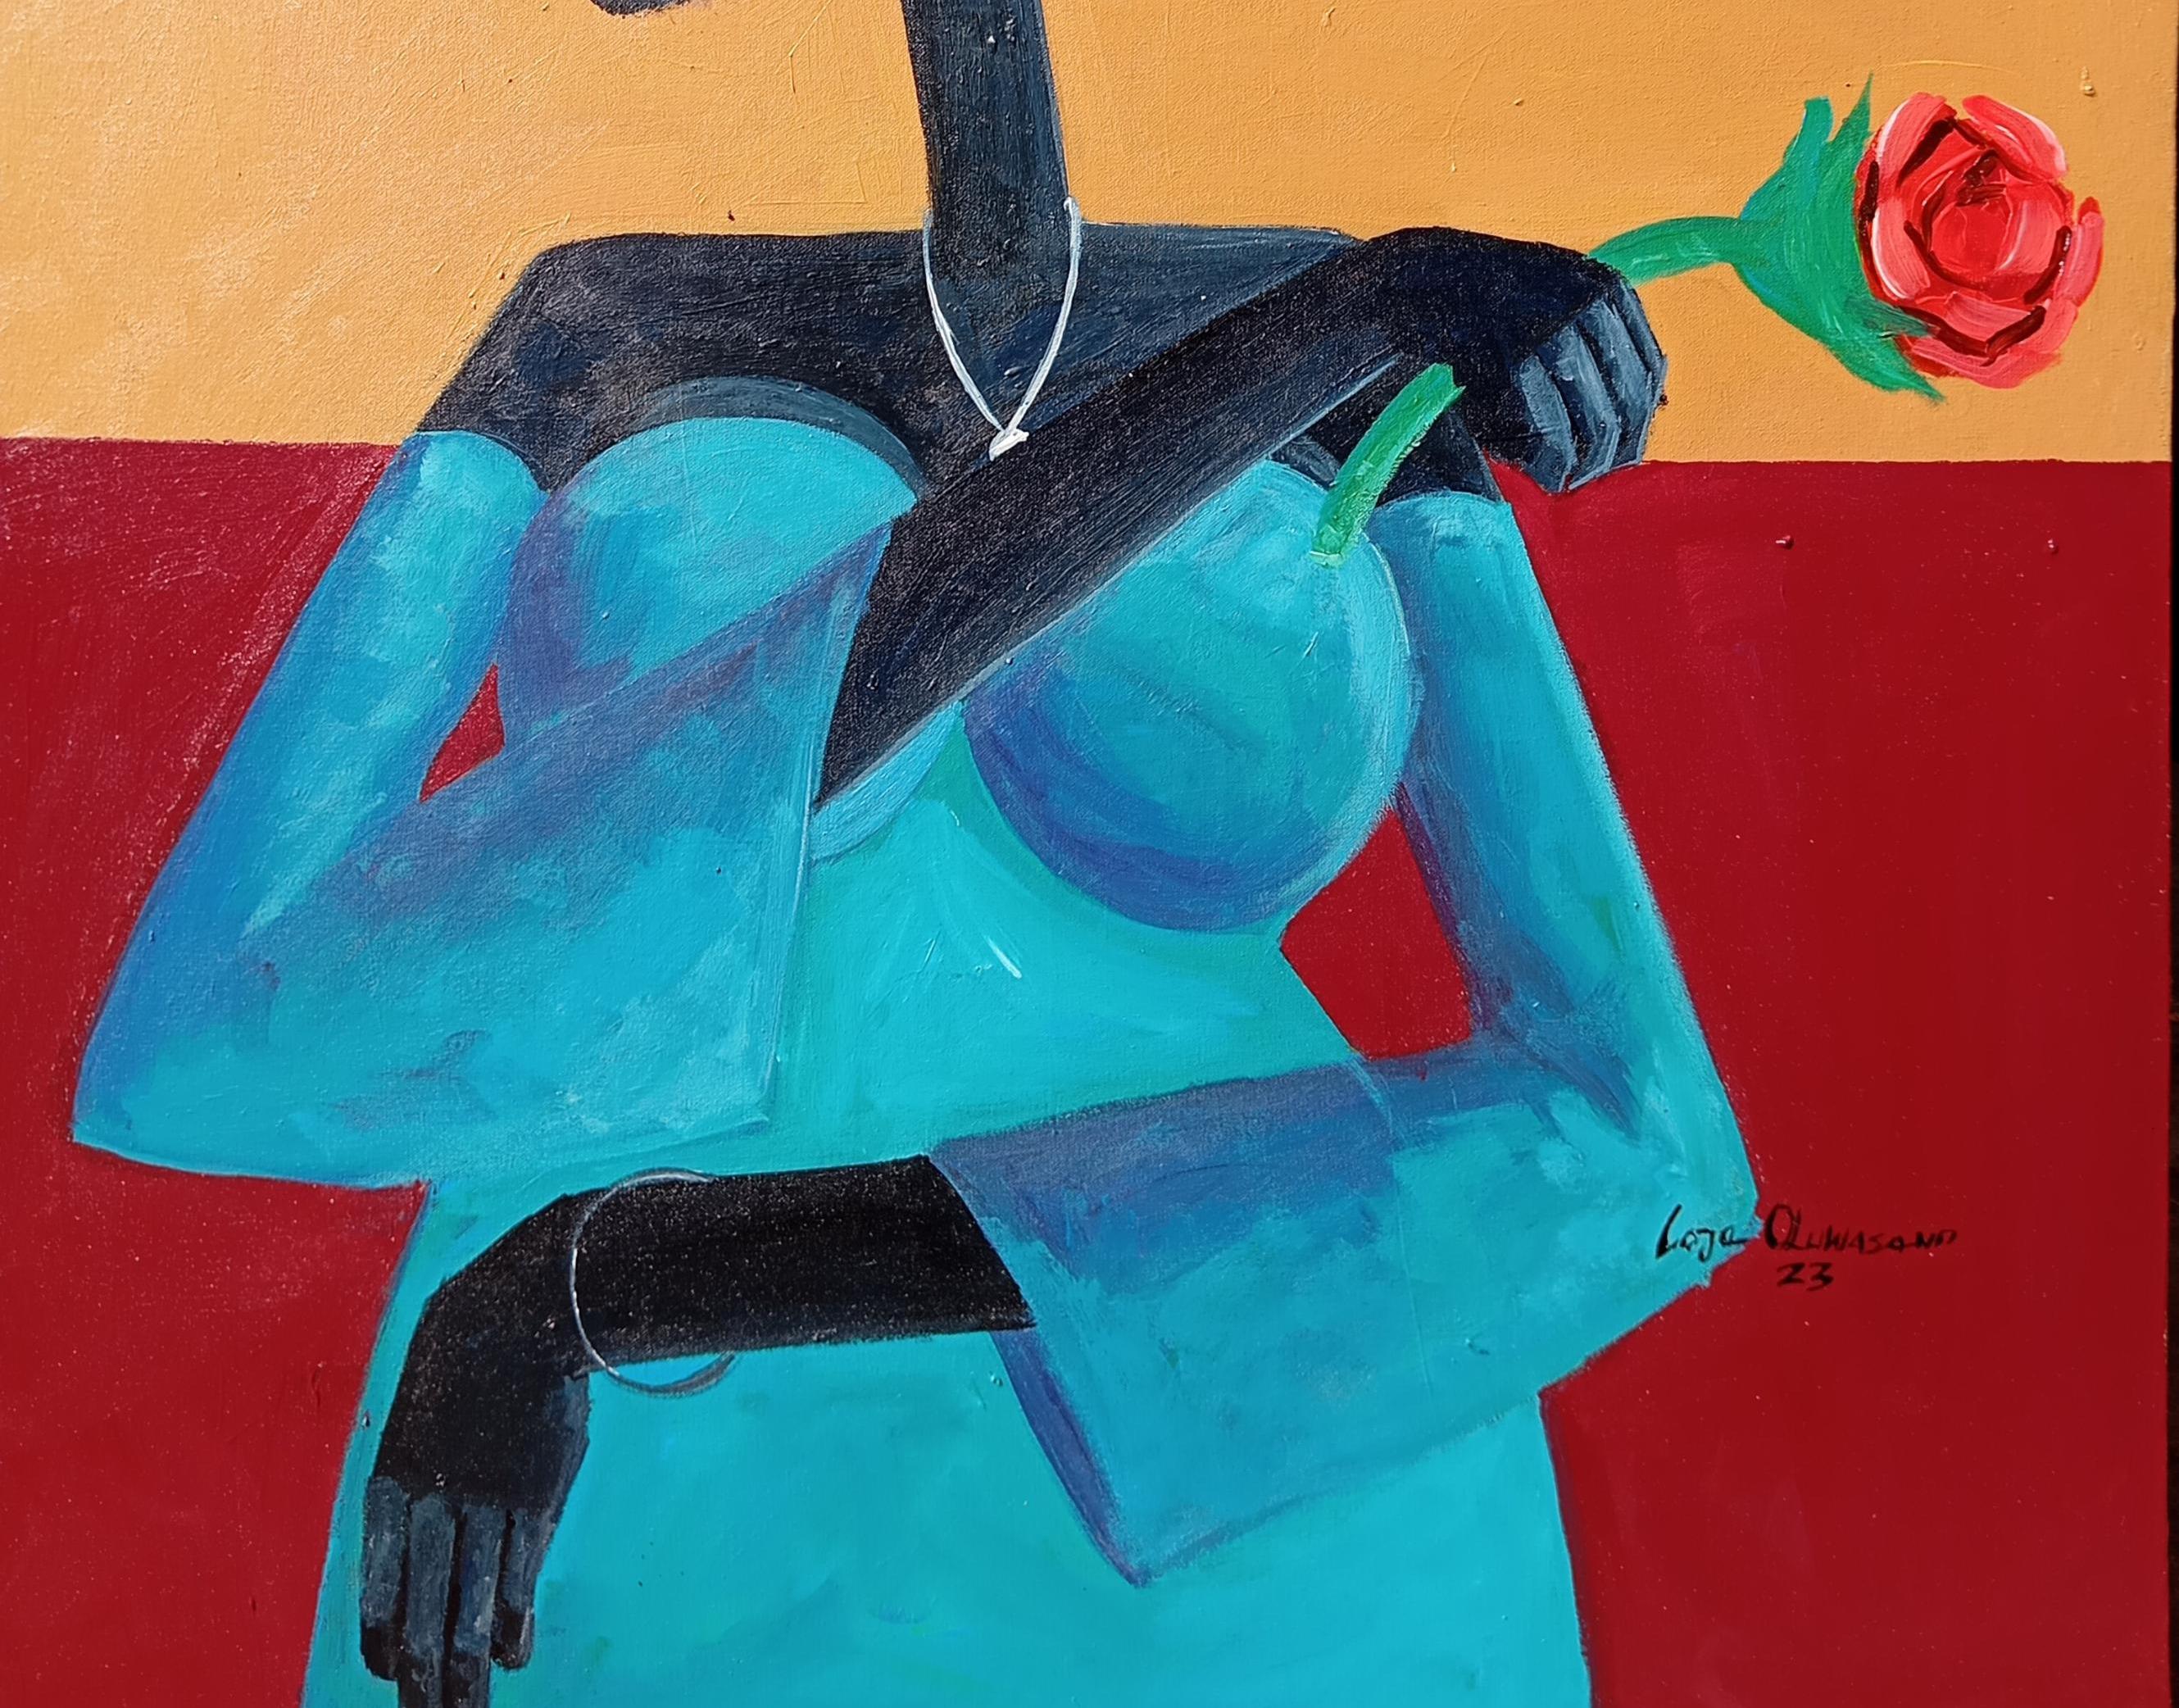 Self Appreciation - Neo-Expressionist Painting by Loje Oluwaseun 